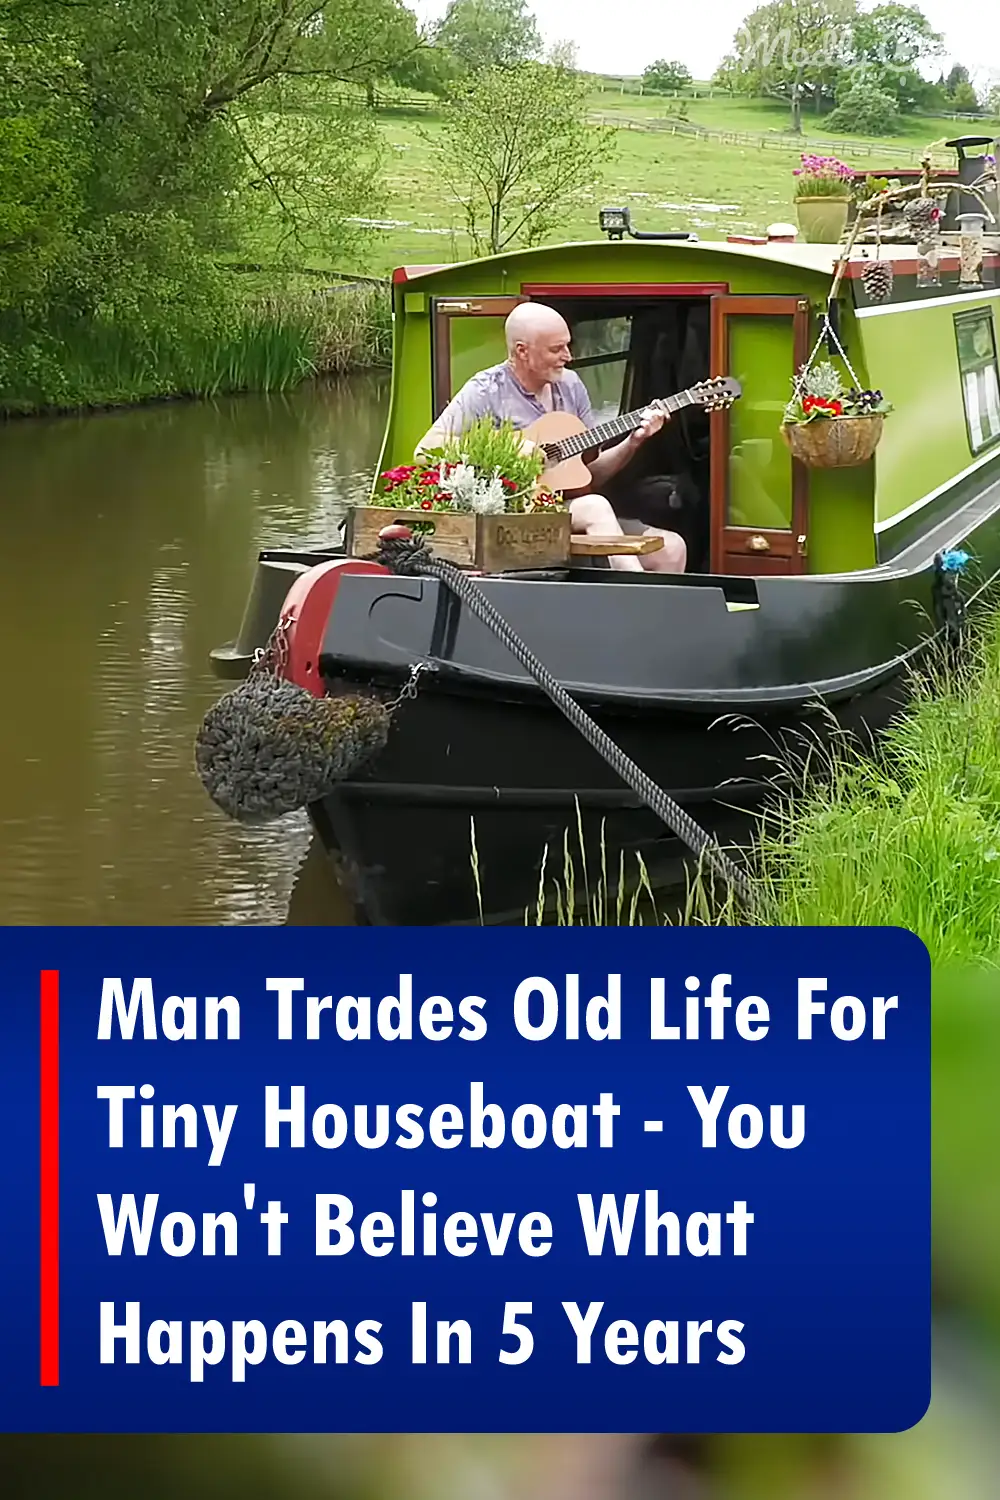 Man Trades Old Life For Tiny Houseboat - You Won\'t Believe What Happens In 5 Years